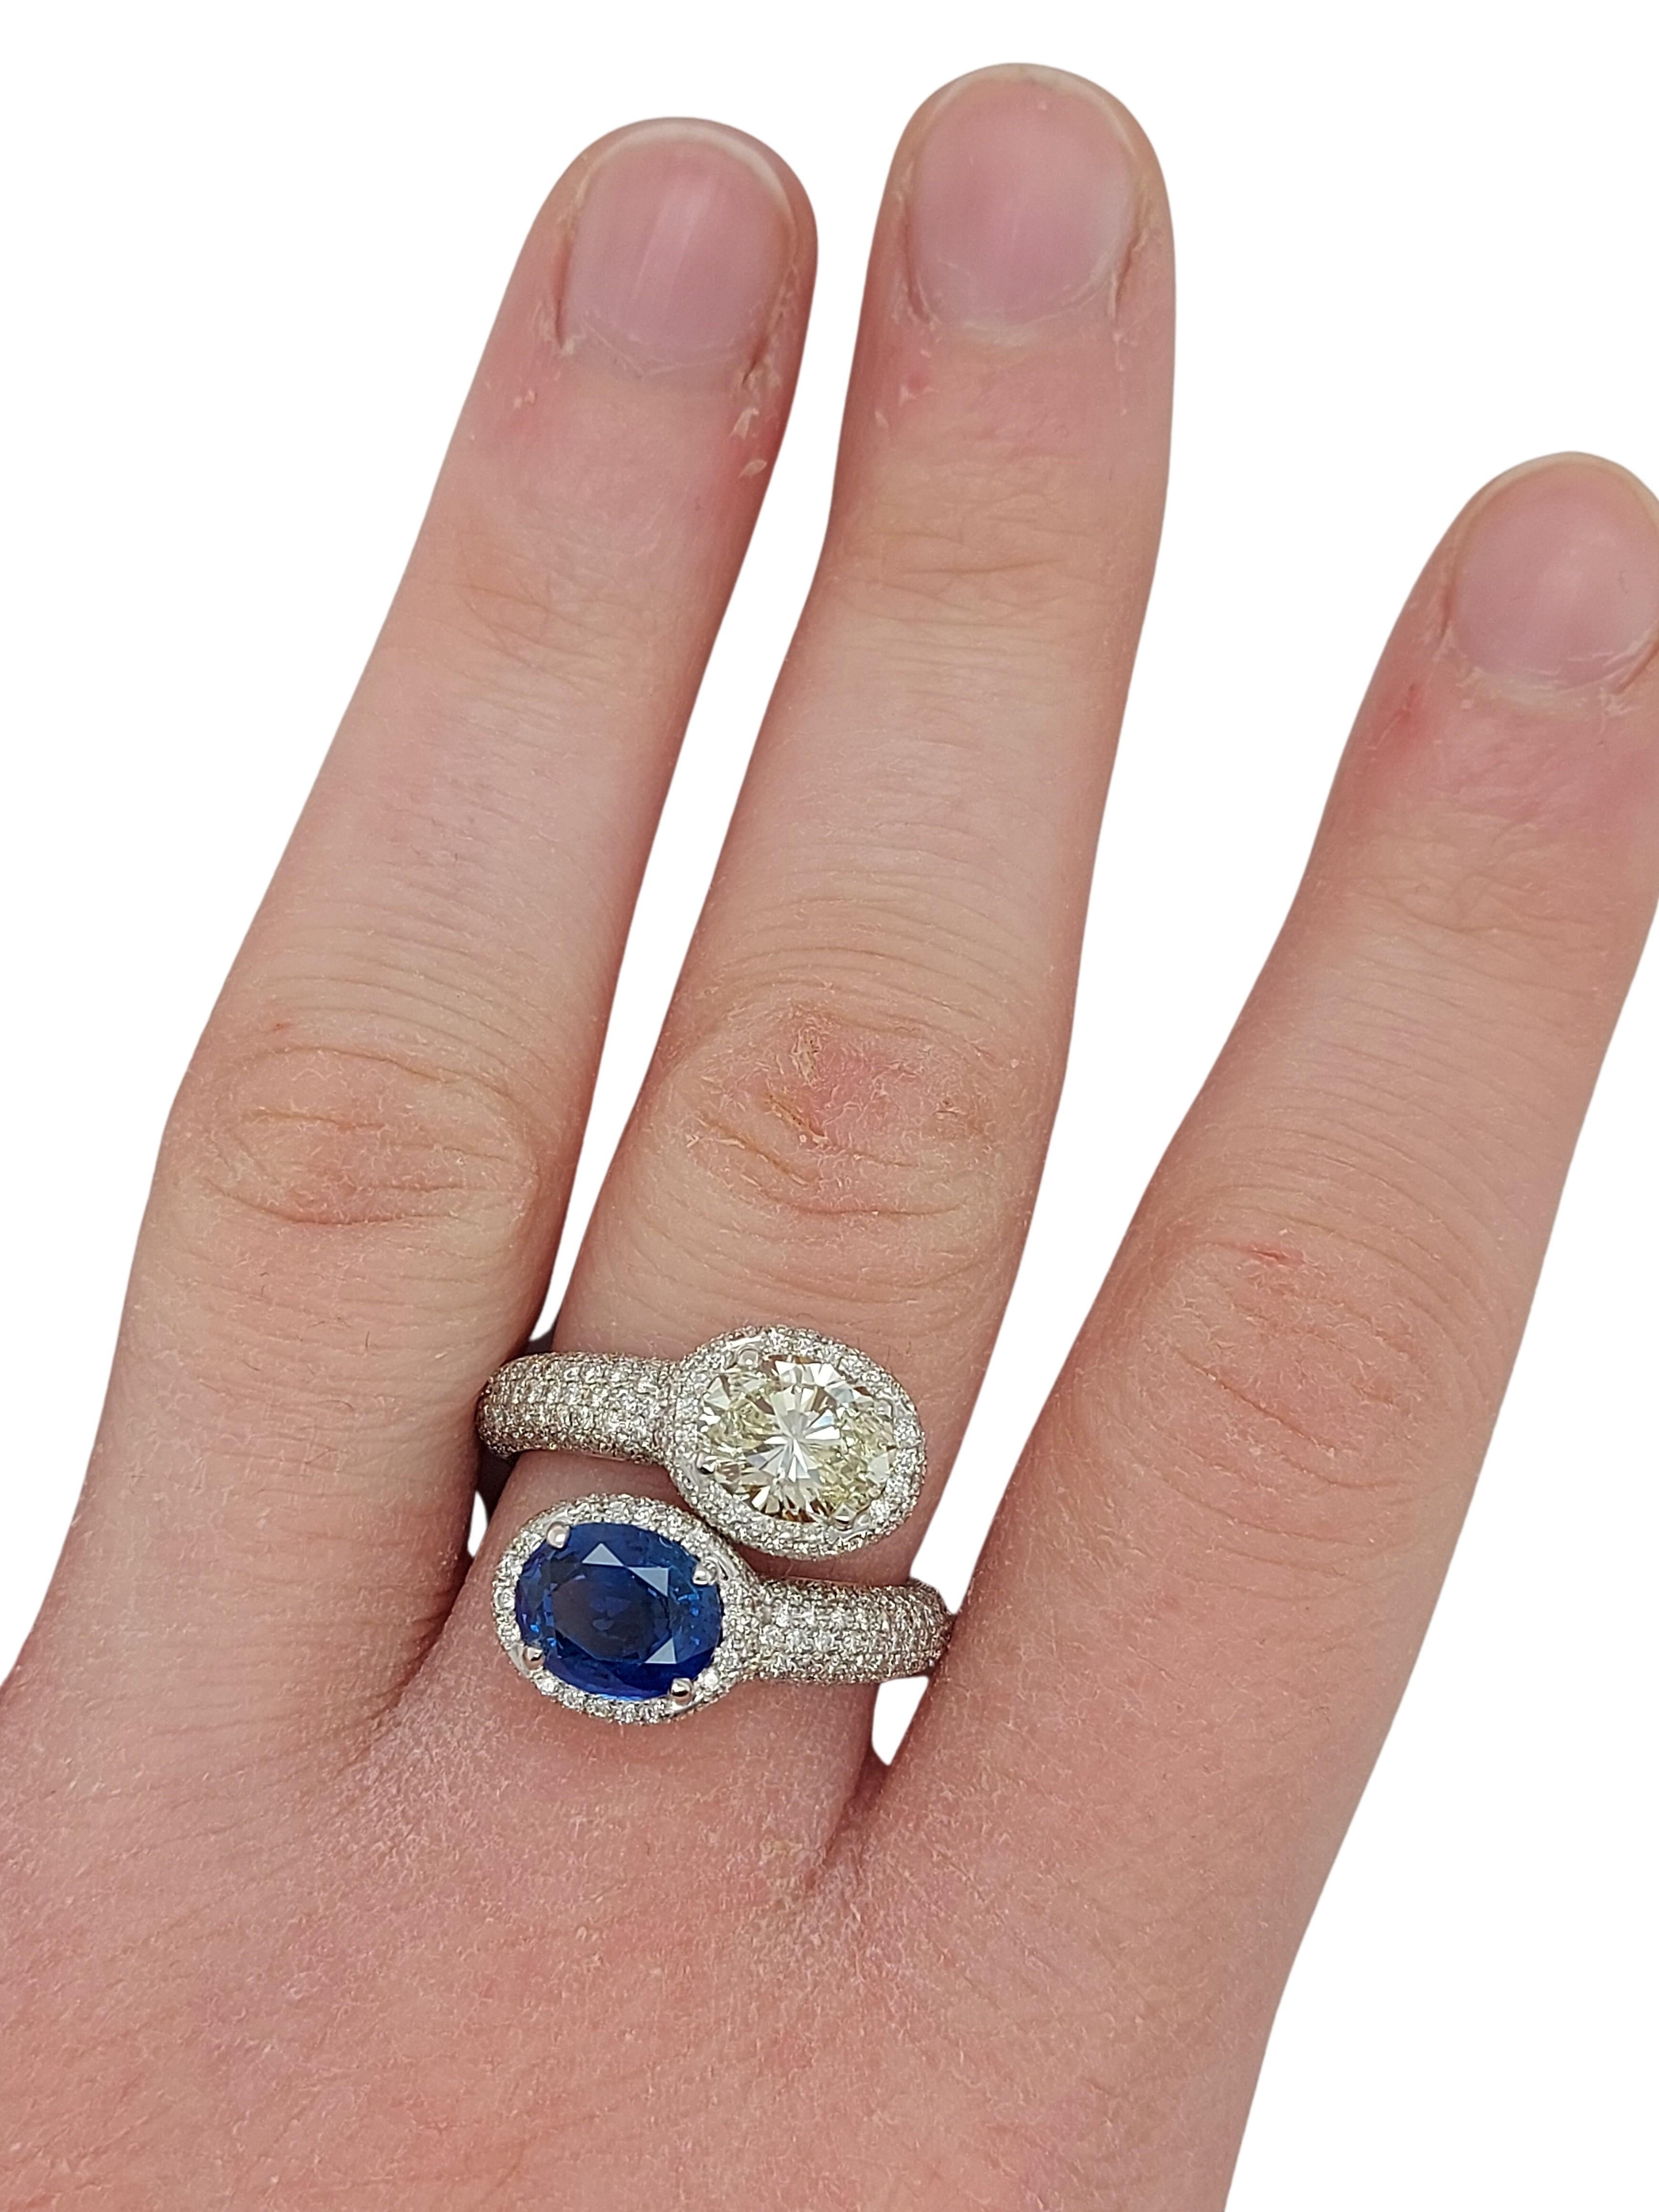 Stunning Toi et Moi 18kt White Gold Ring with a 2.63 Carat Sapphire, 1.67 Carat  For Sale 8